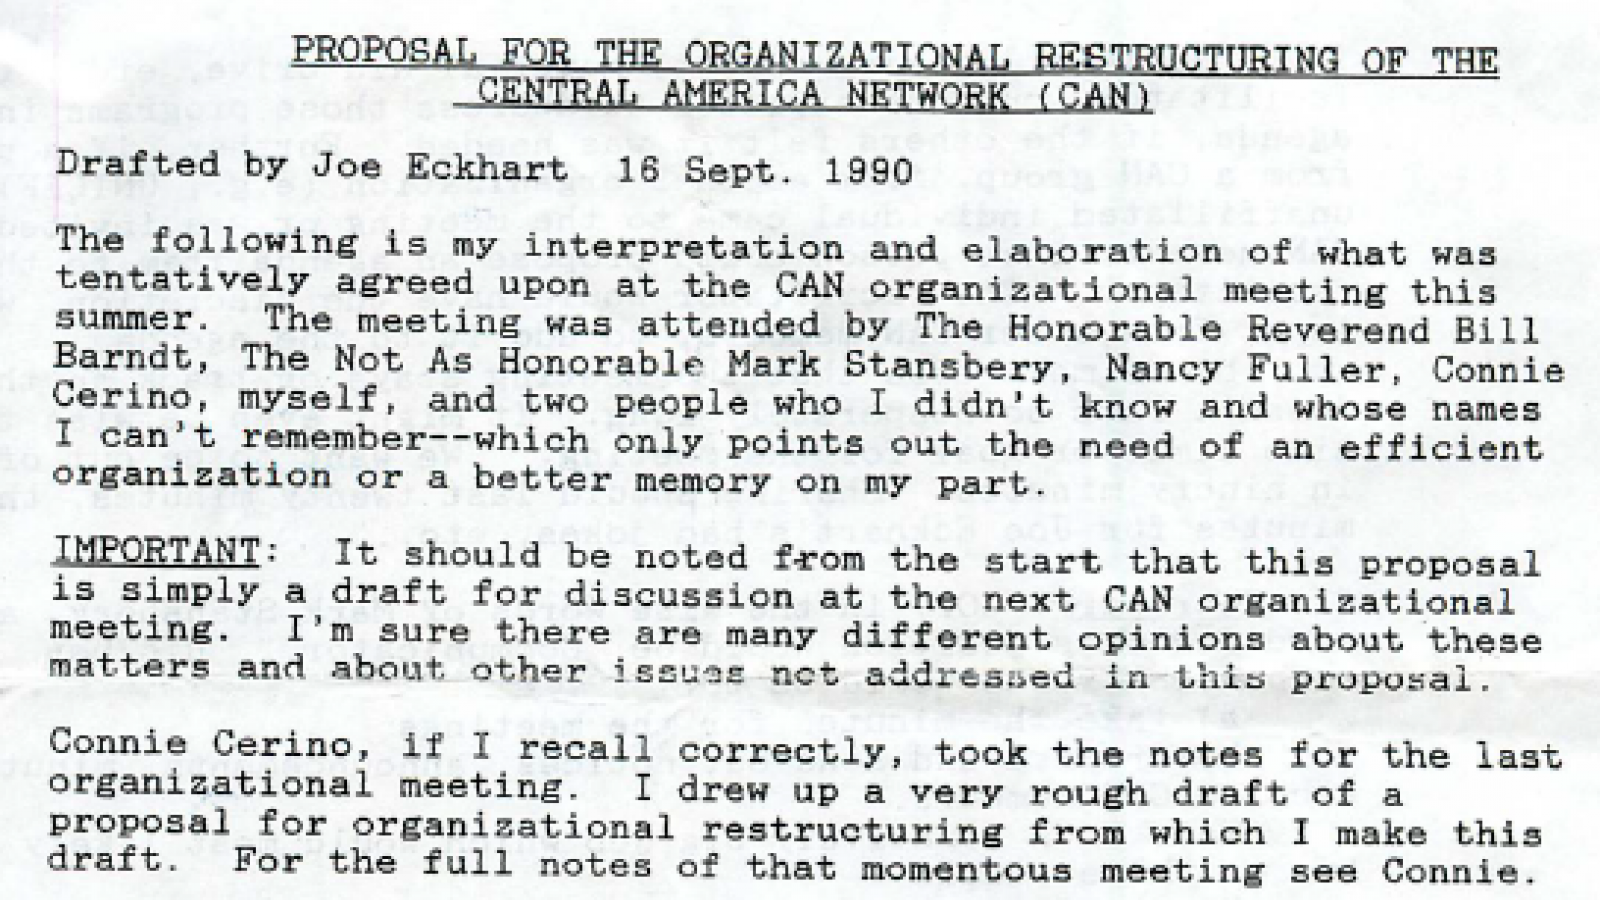 Proposal for Restructuring Central America Network Sept. 16, 1990